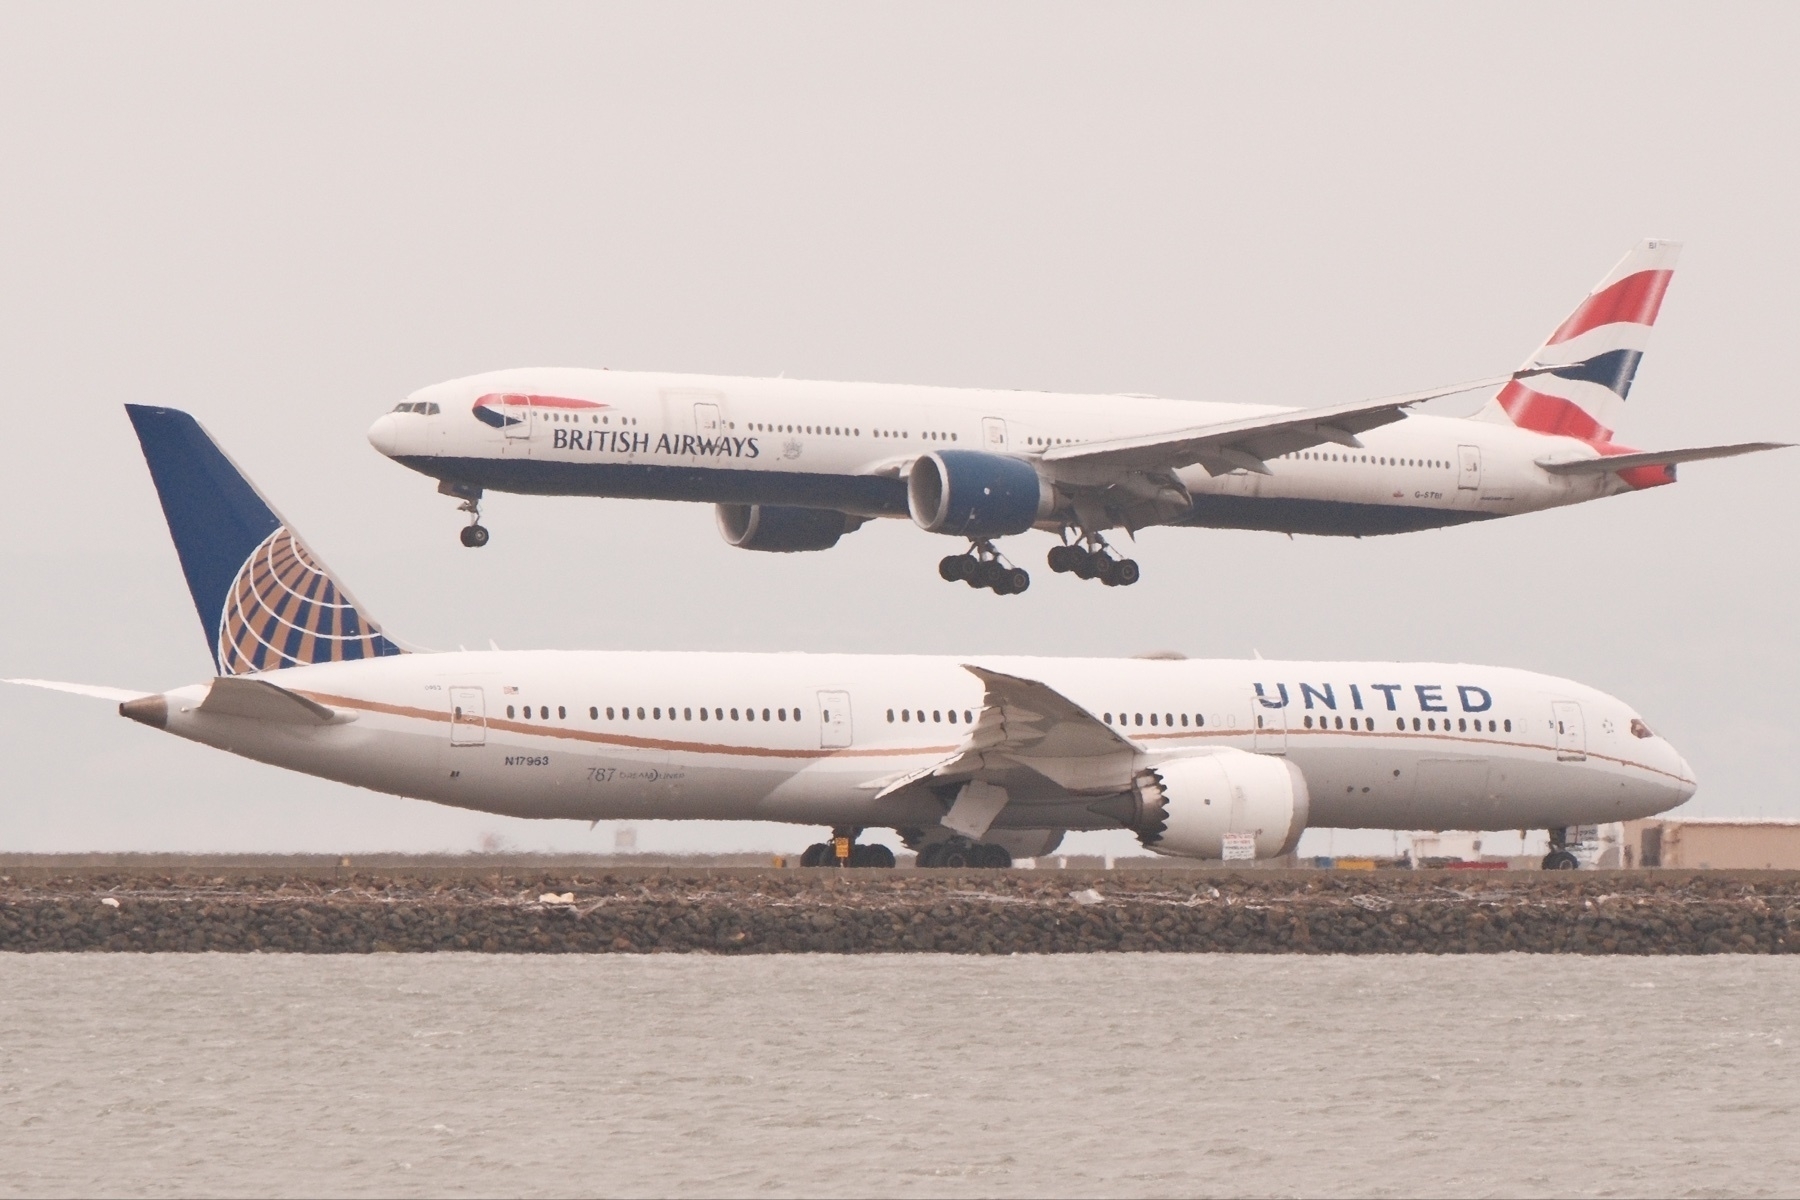 A United 787 is turning on to SFO 28L, while above it, a British Airways 777 lands on 28R.